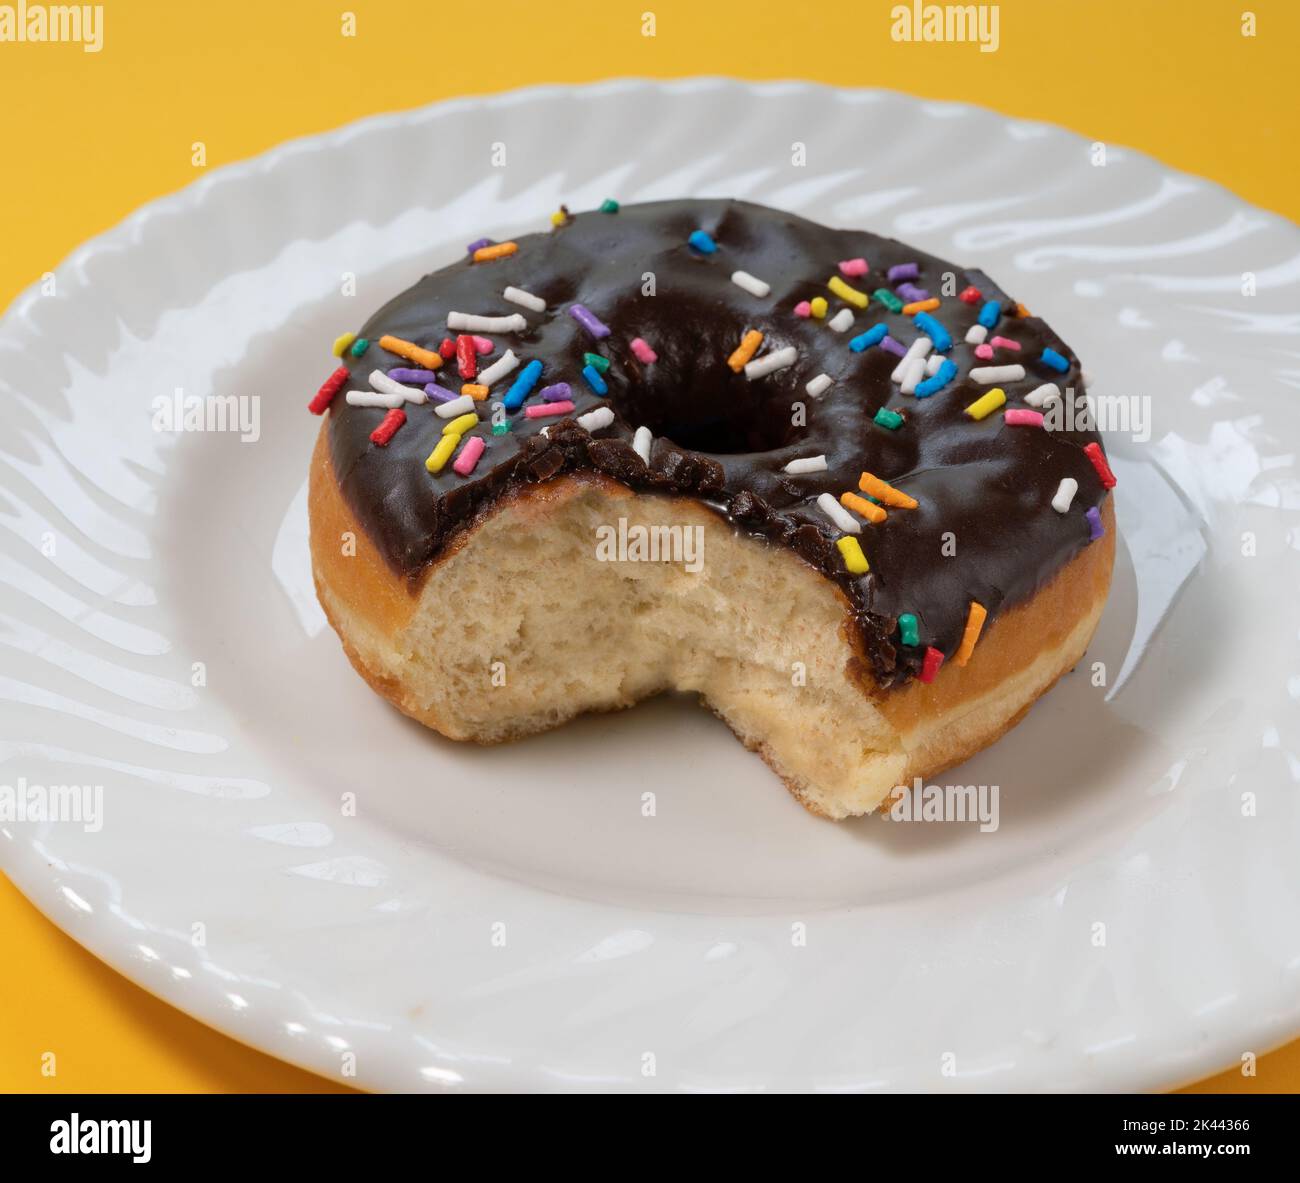 Eaten donut with chocolate icing and sprinkles on white plate Stock Photo